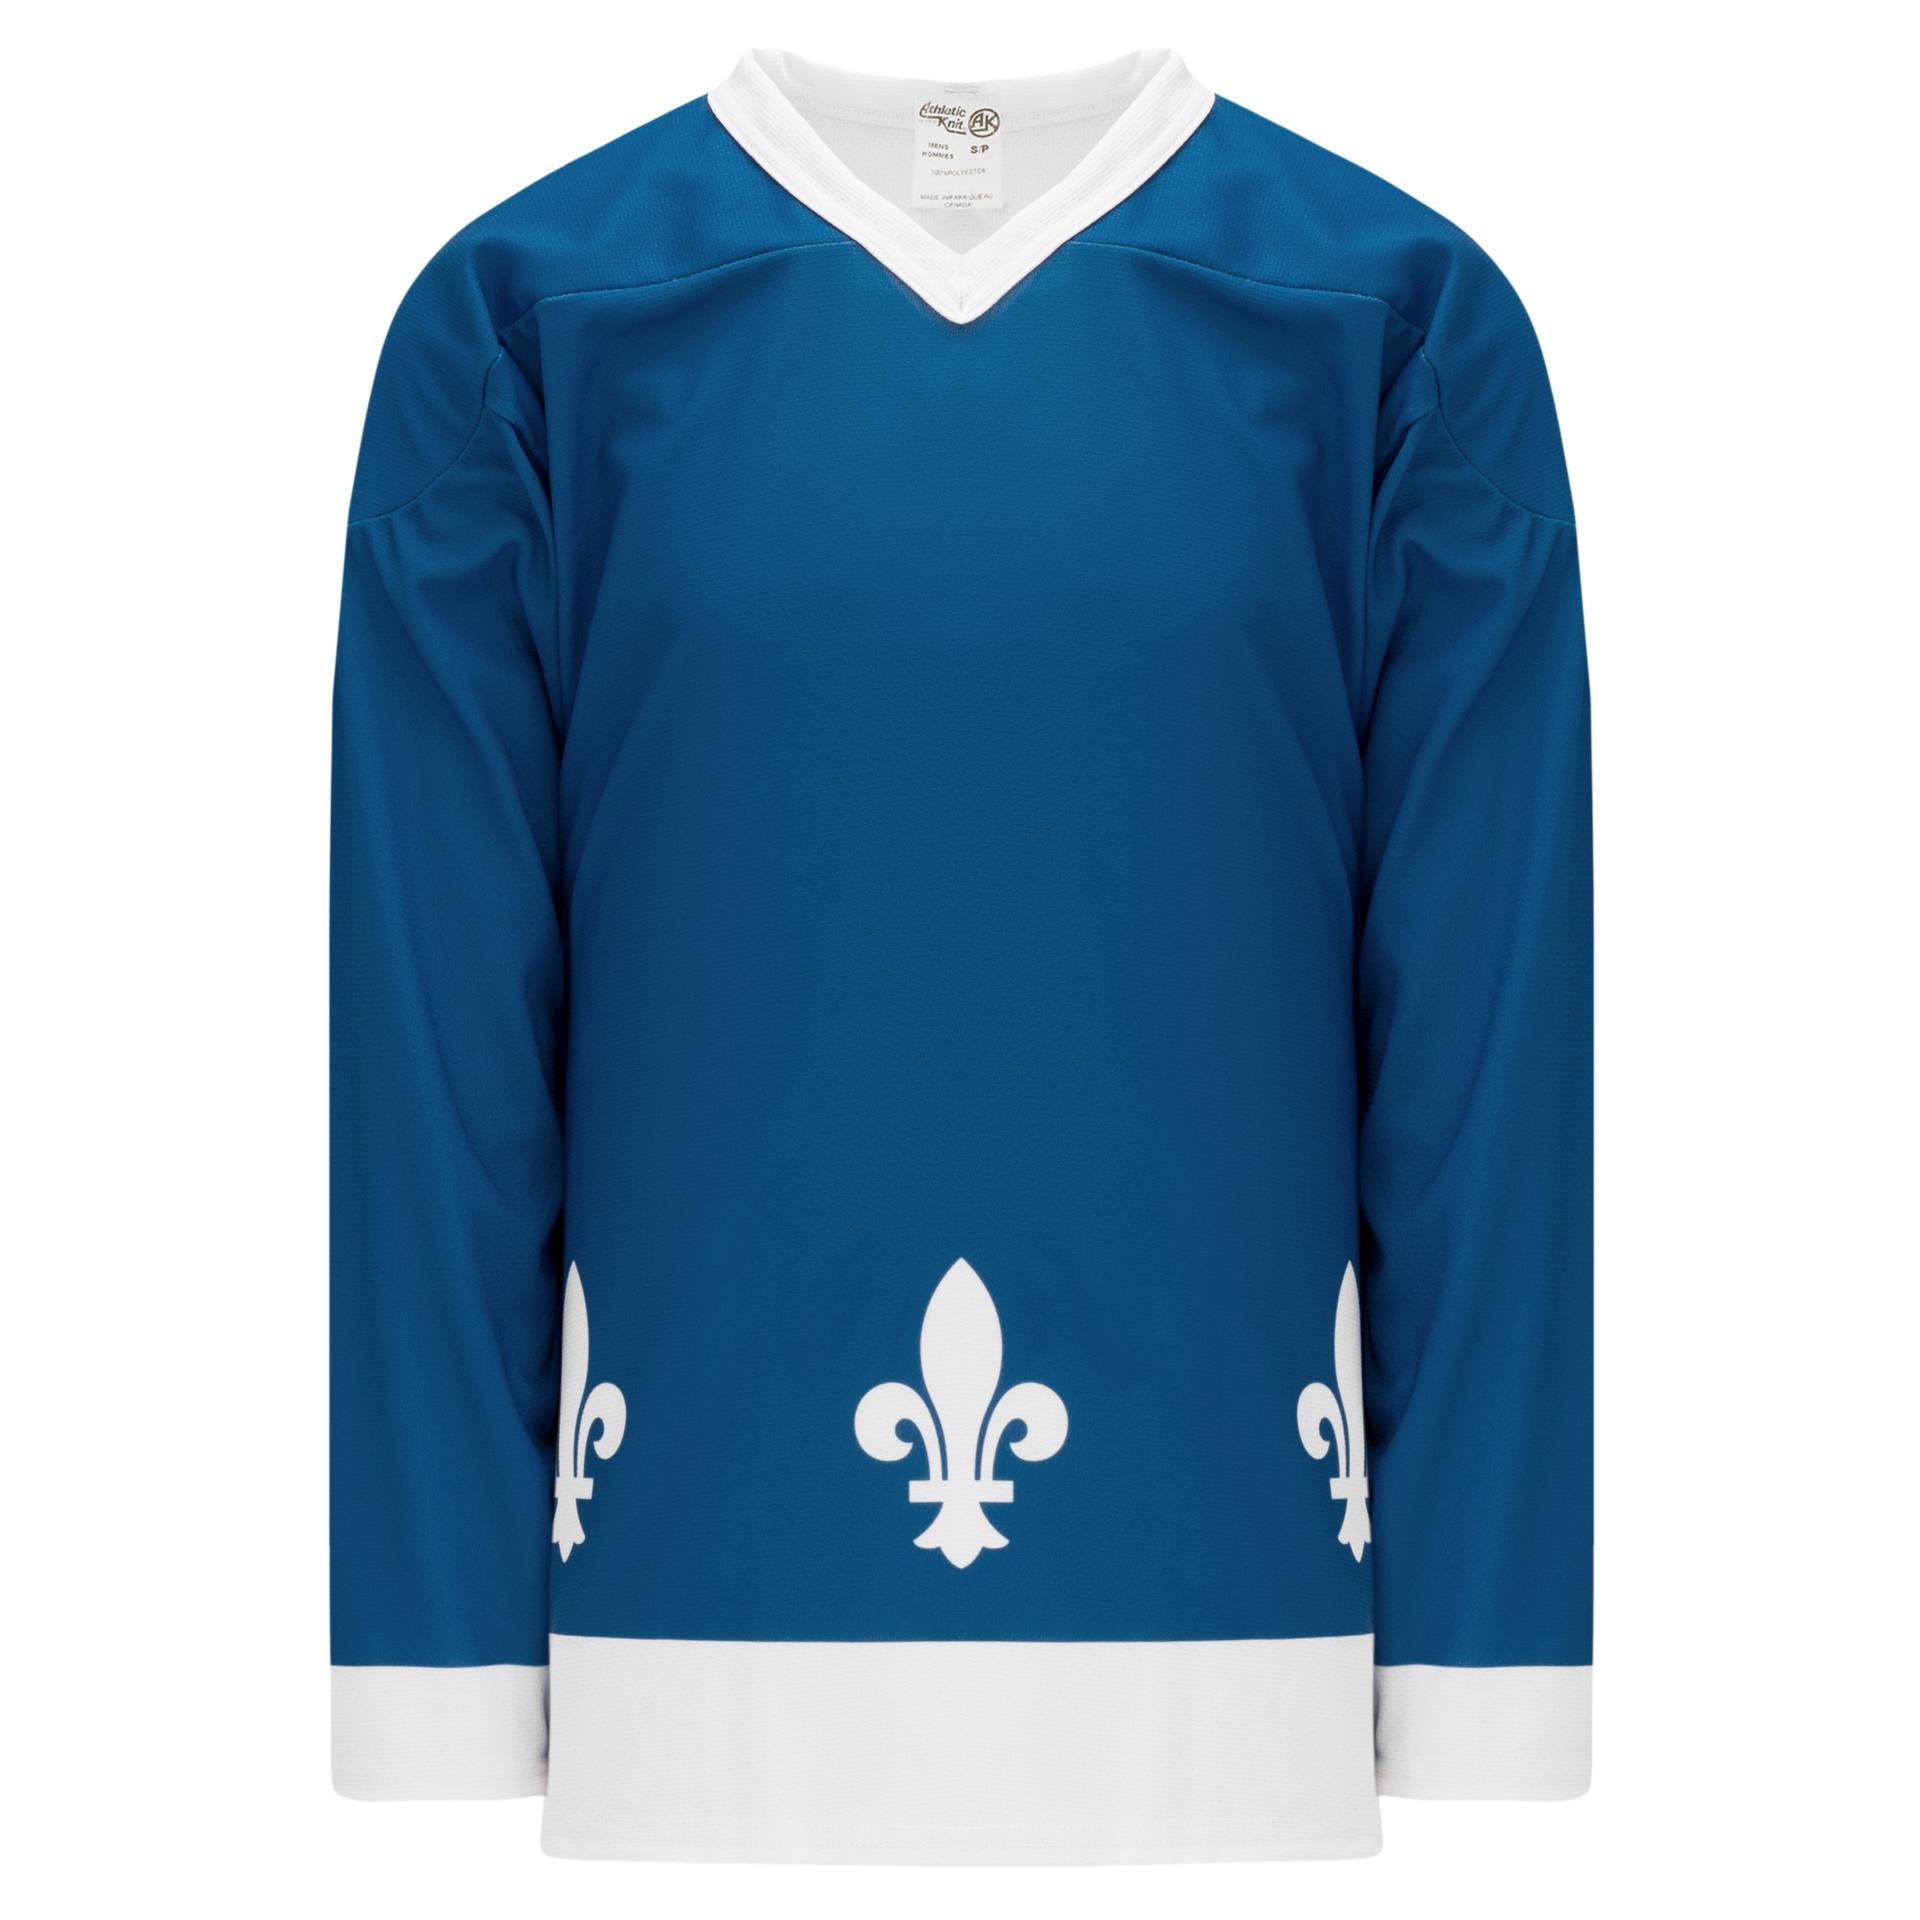 Mitchell & Ness Quebec Nordiques Hockey T-Shirt